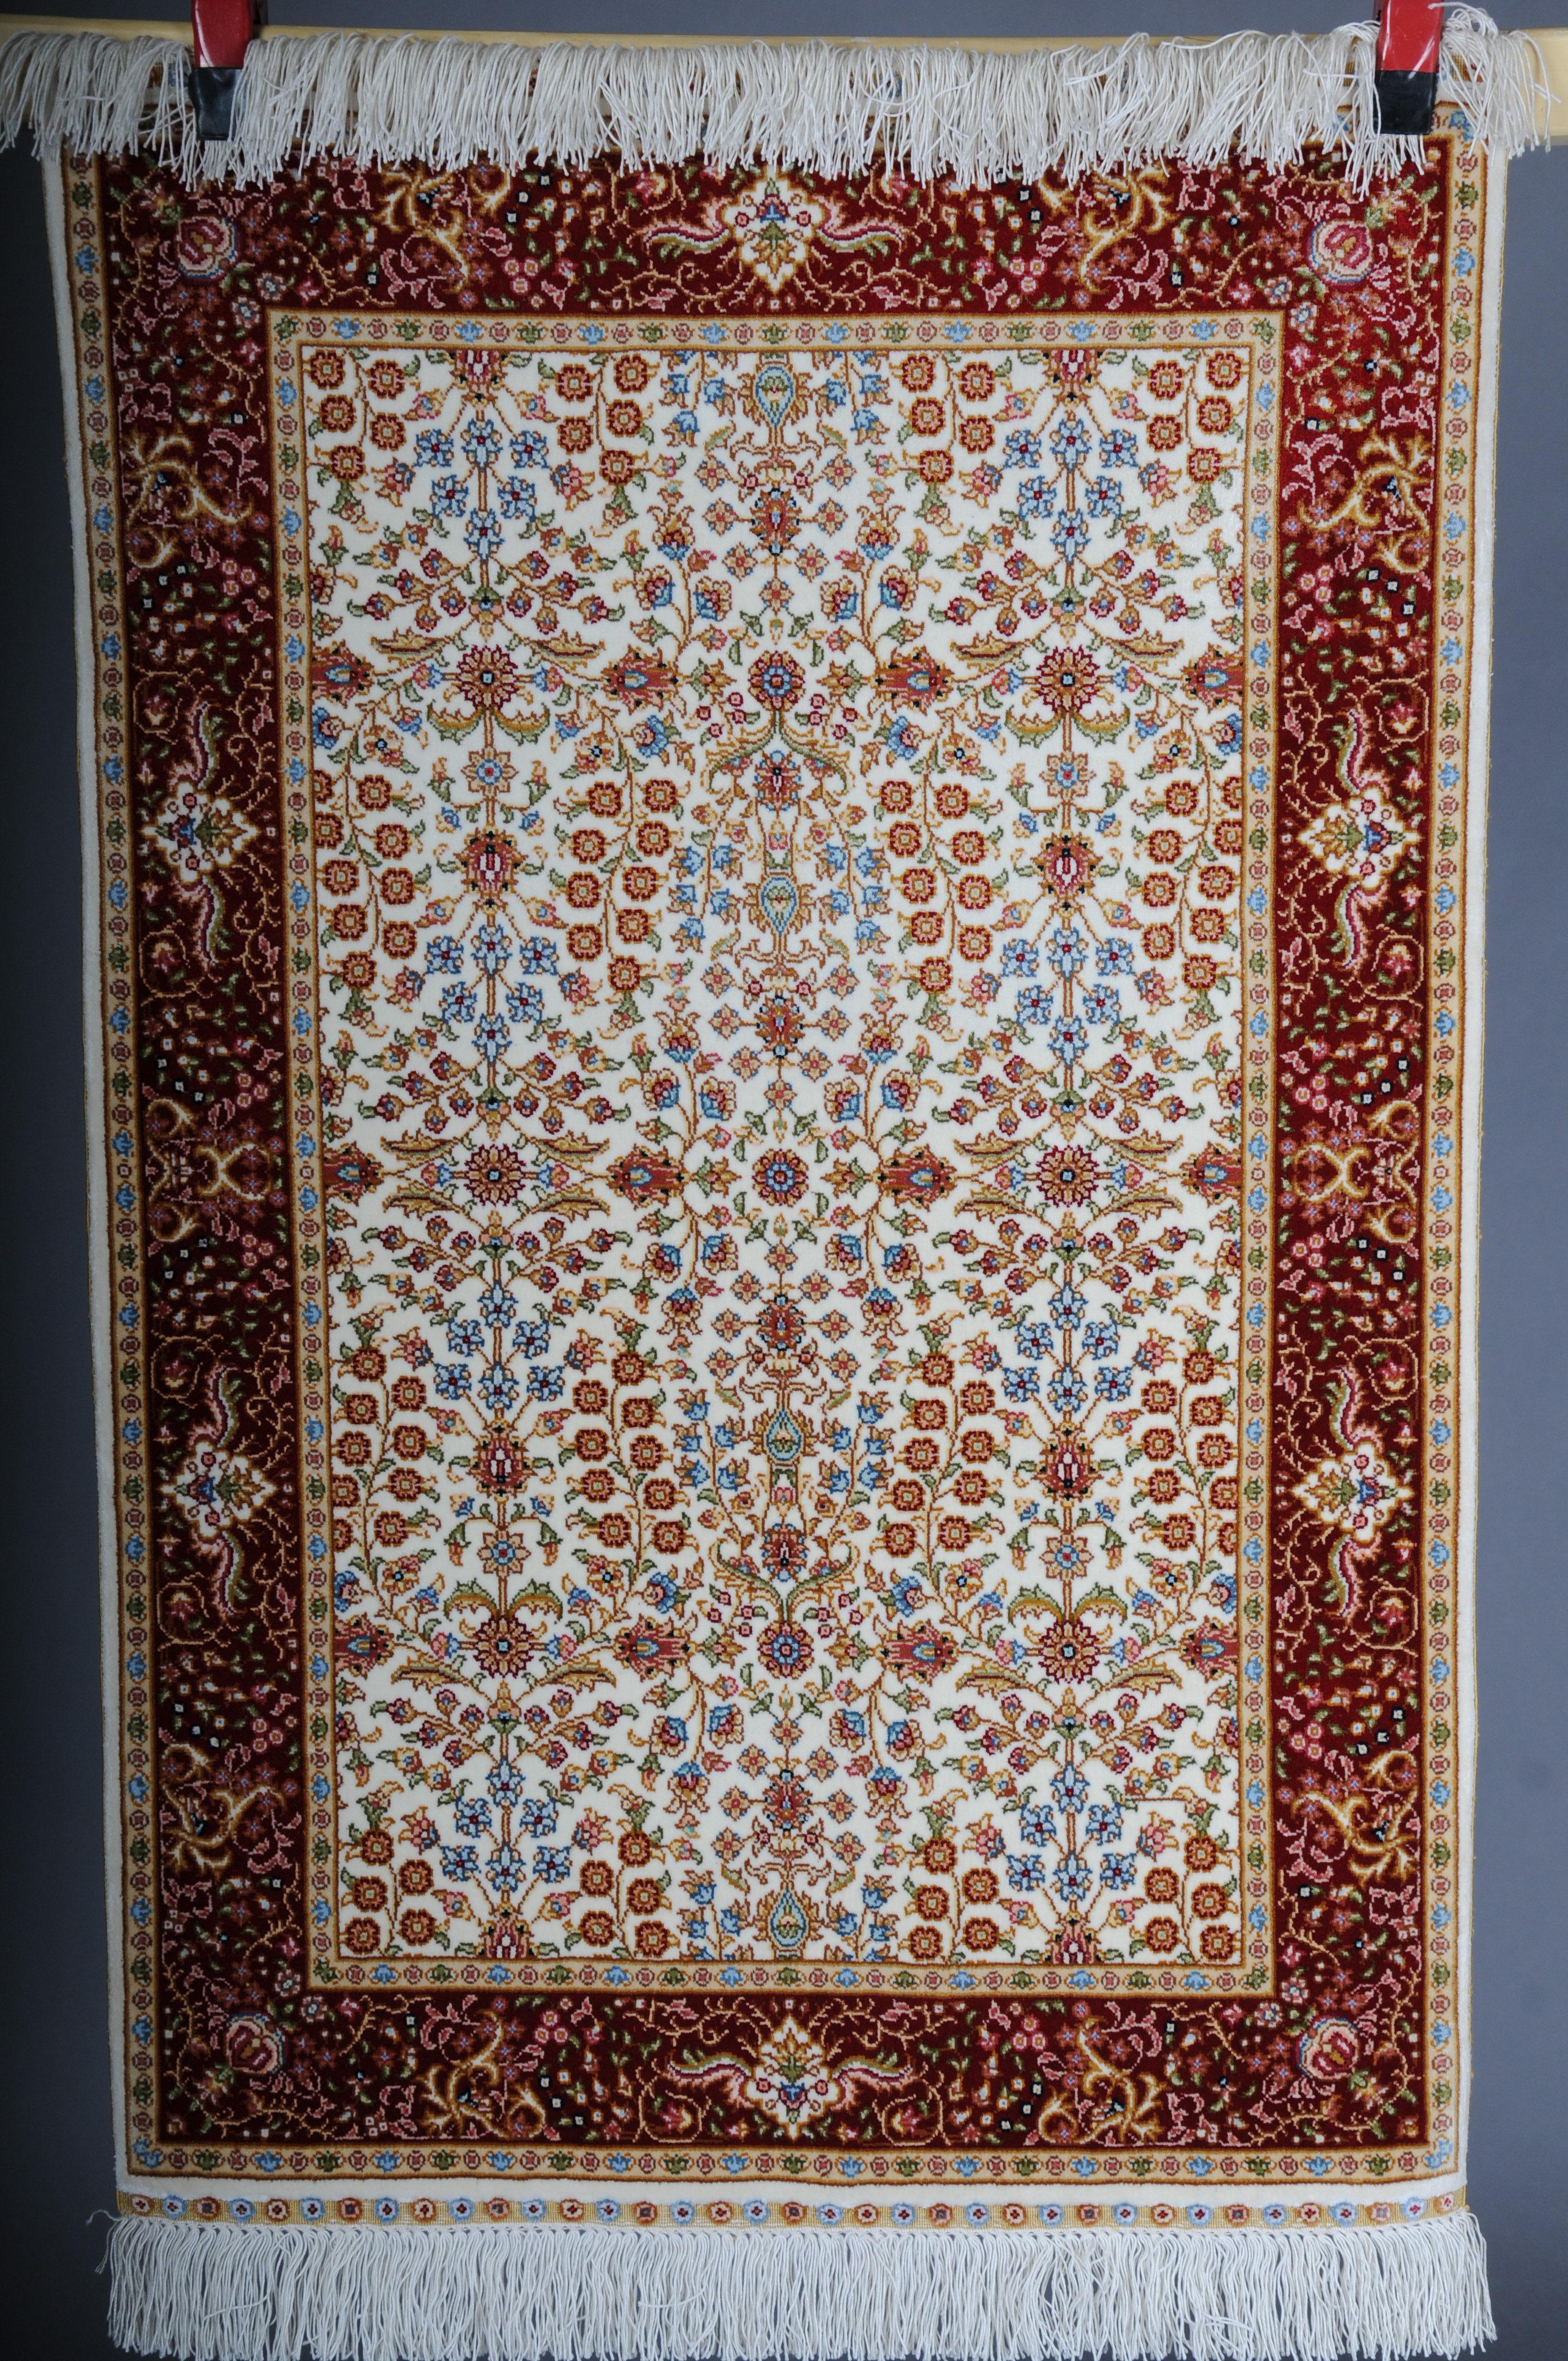 Anatolian prayer rug/tapestry cotton/silk, 20th century, signed

This hand-knotted Hereke rug is a magnificent addition to your living space. Once intended for imperial palaces, the detailed work of art now decorates your home. Only natural